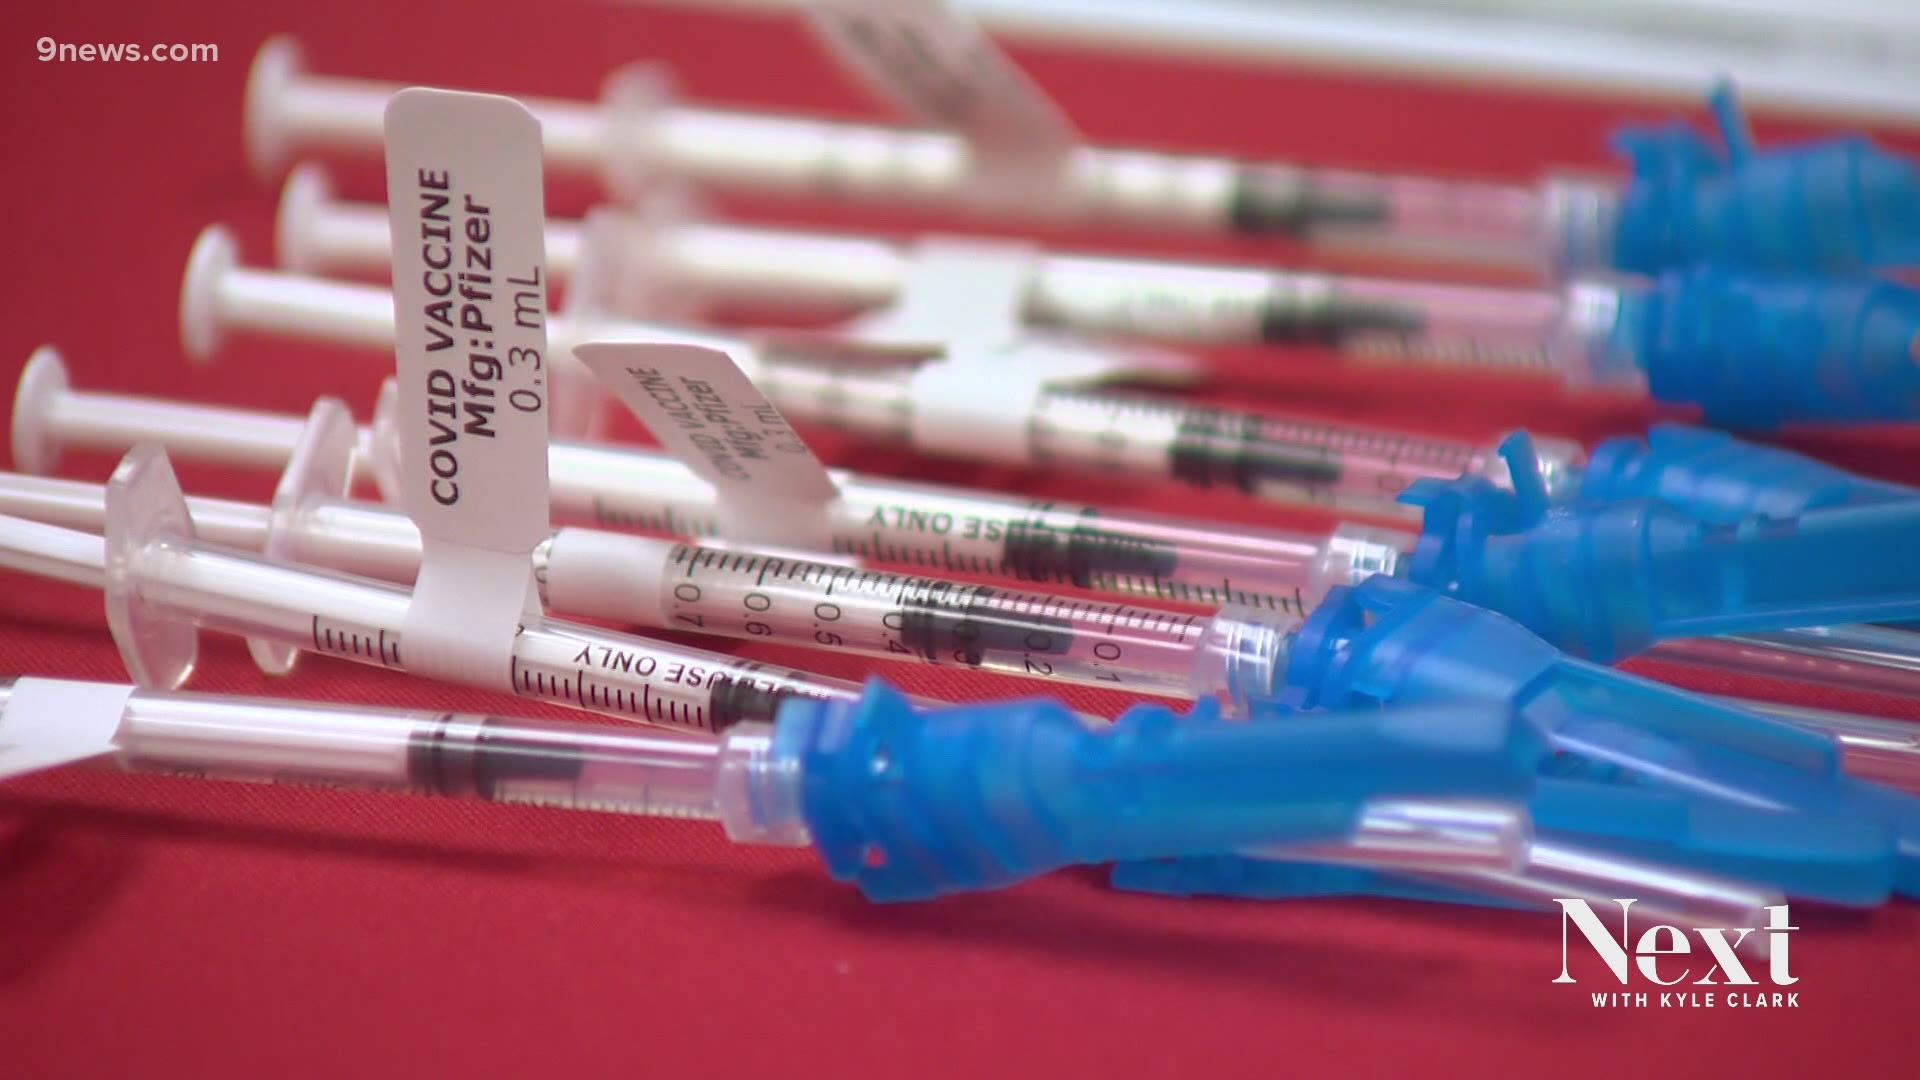 The Colorado Department of Public Health and Environment said 352,533 doses of COVID-19 vaccines are slated to expire soon, as the state vaccination rate falls.